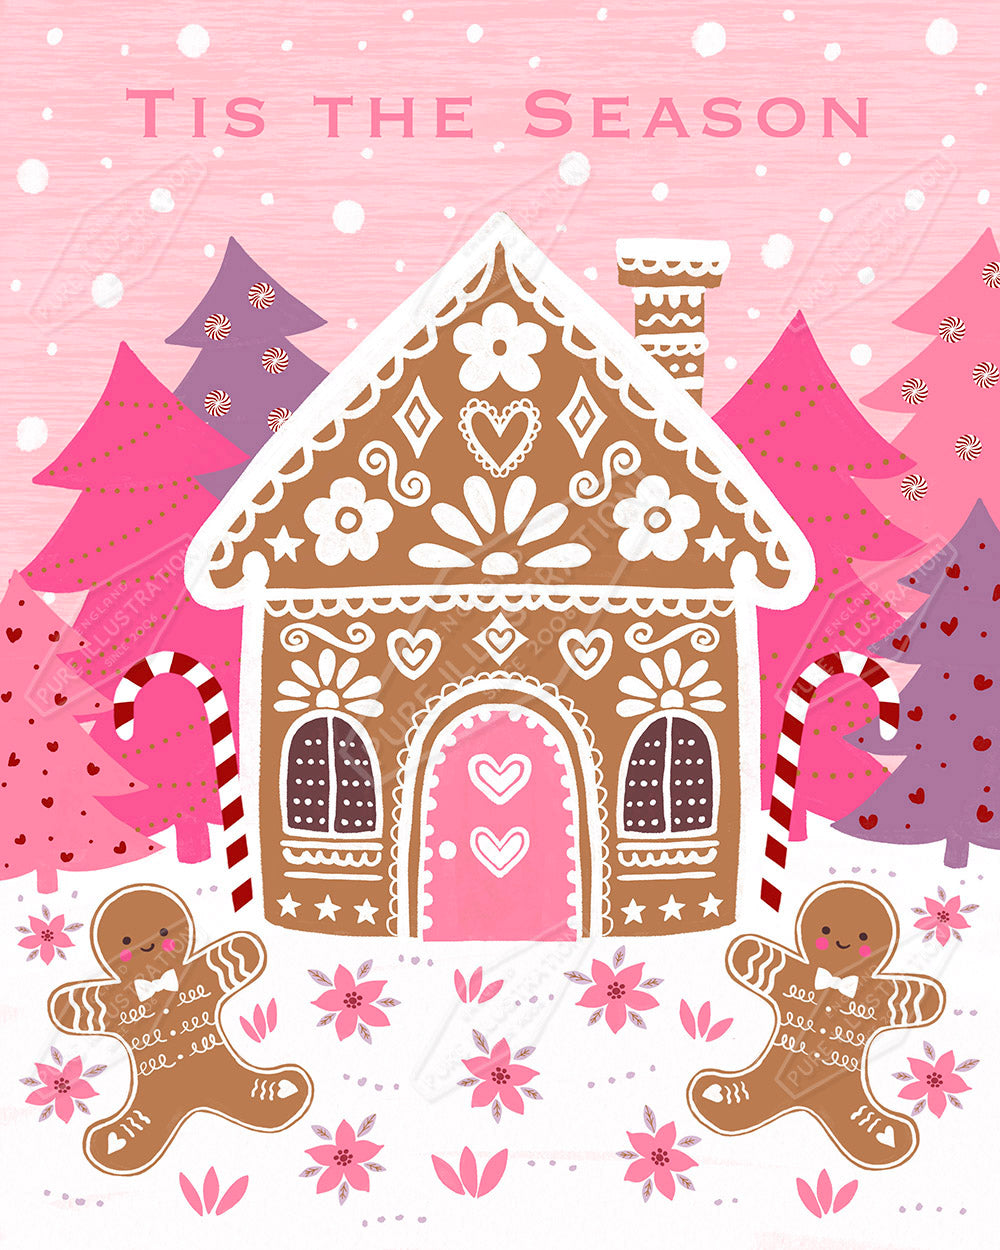 Gingerbread House Christmas Design by Sian Summerhayes for Pure Art Licensing Agency